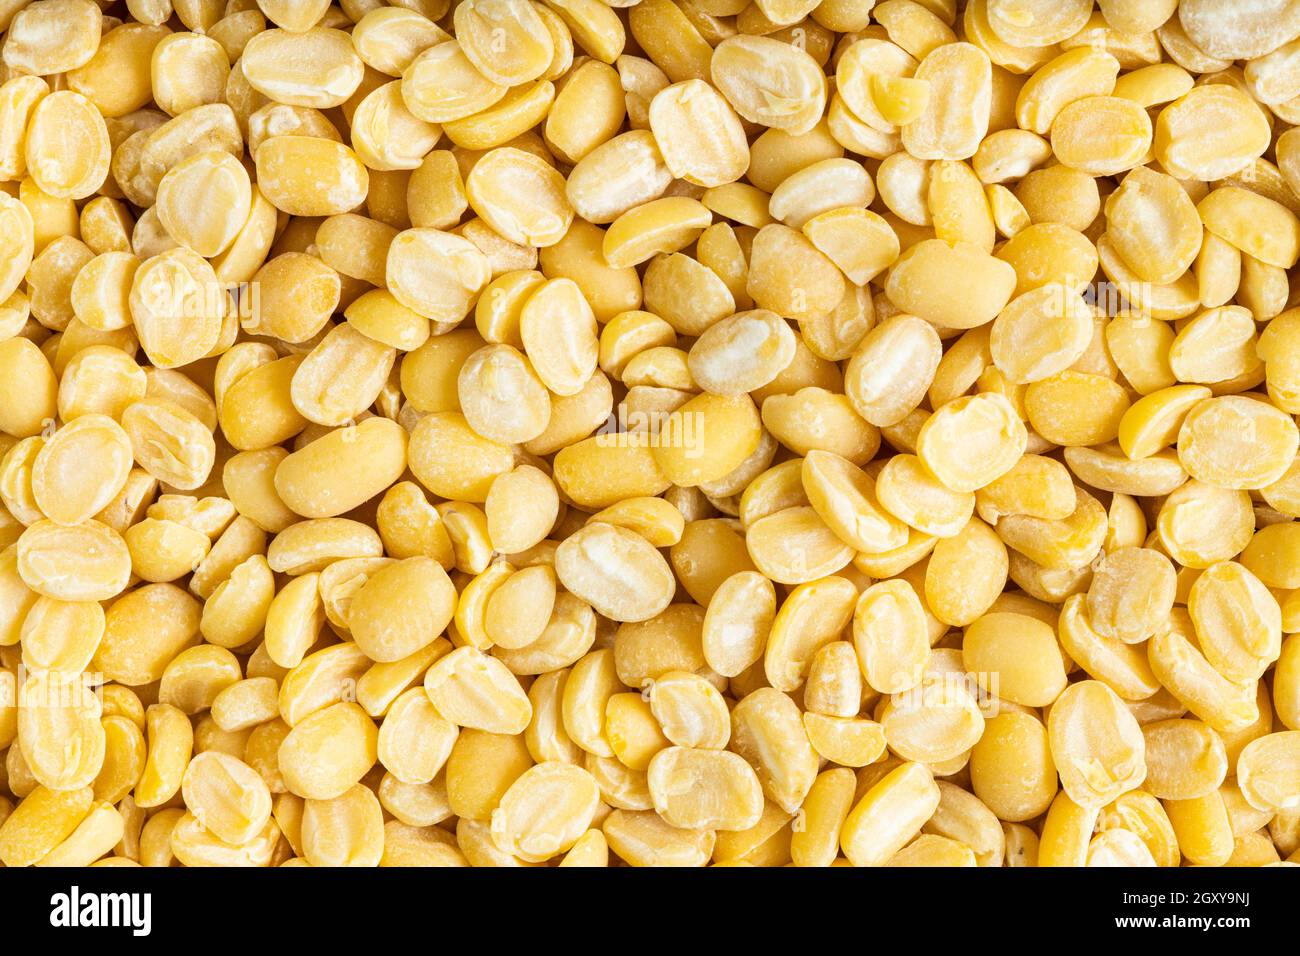 food background - many raw moong dal (split green mung) beans close up Stock Photo